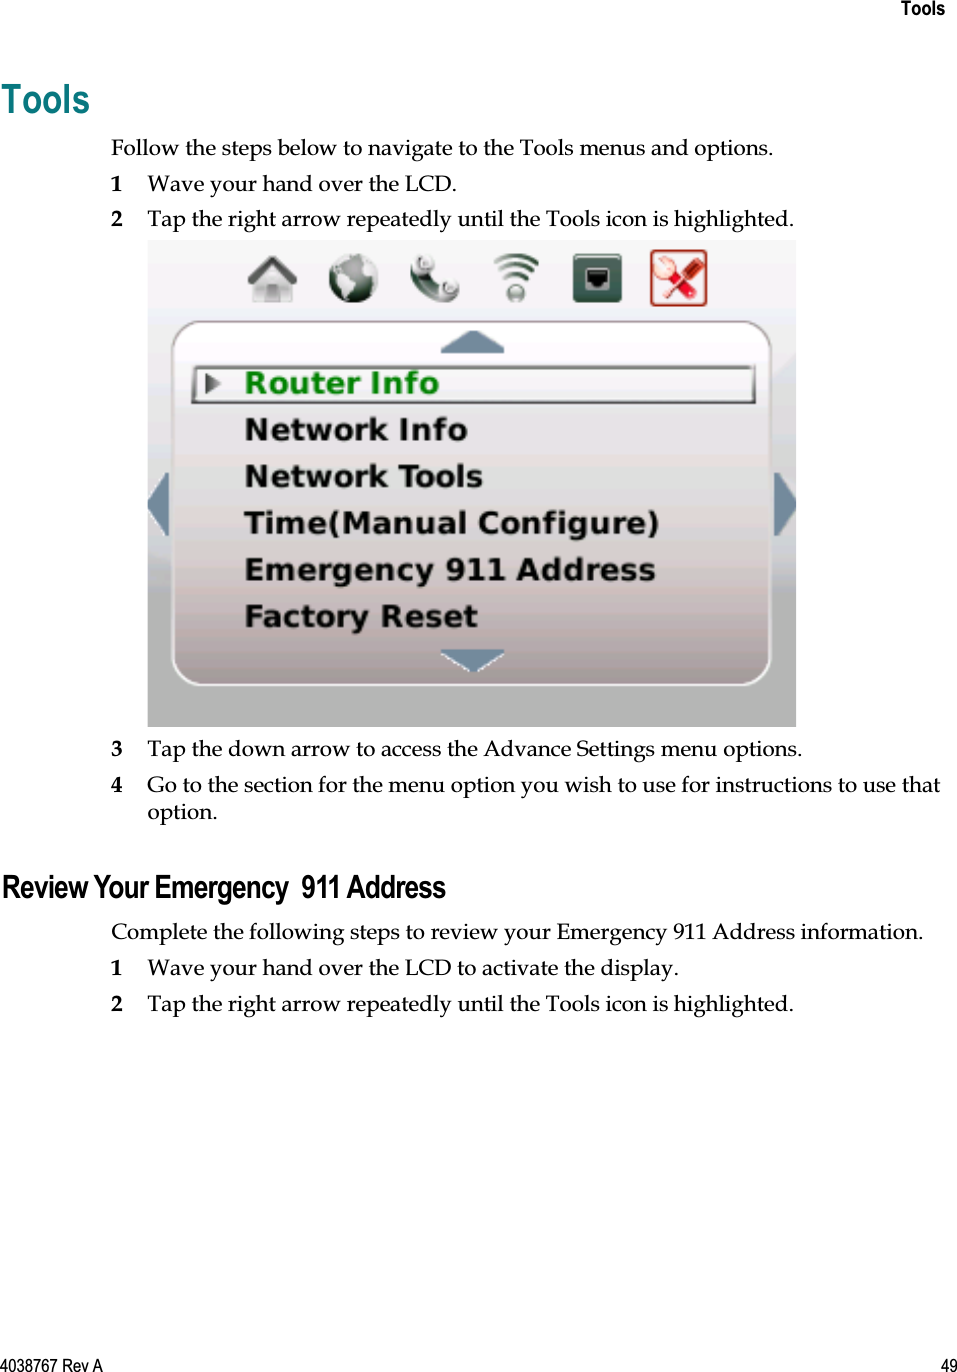    Tools  4038767 Rev A  49  Tools Follow the steps below to navigate to the Tools menus and options.  1 Wave your hand over the LCD.  2 Tap the right arrow repeatedly until the Tools icon is highlighted.   3 Tap the down arrow to access the Advance Settings menu options. 4 Go to the section for the menu option you wish to use for instructions to use that option.  Review Your Emergency  911 Address Complete the following steps to review your Emergency 911 Address information. 1 Wave your hand over the LCD to activate the display. 2 Tap the right arrow repeatedly until the Tools icon is highlighted. 